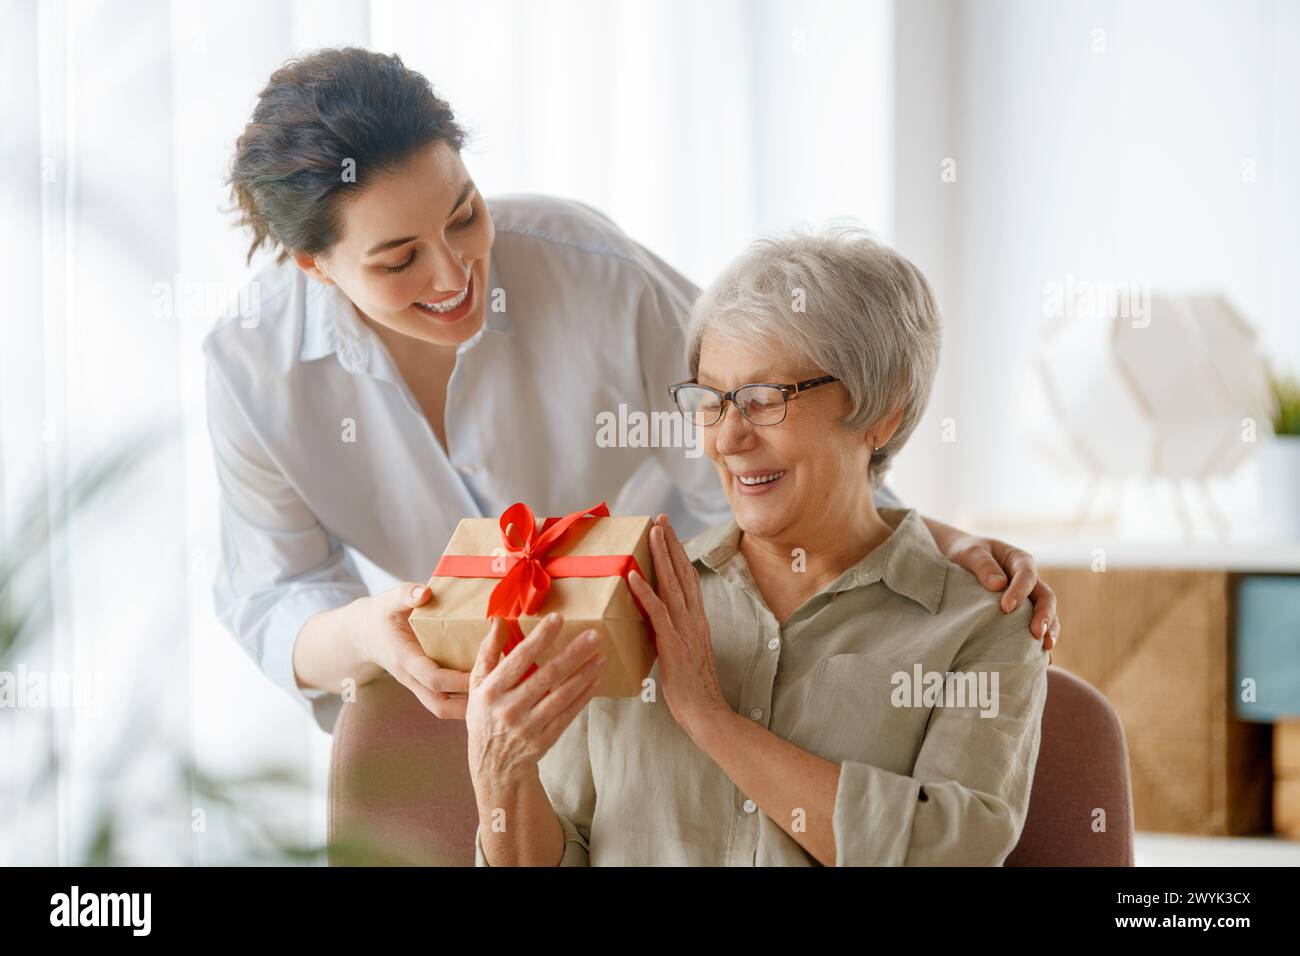 Beautiful young woman congratulating mother and giving her gift. Stock Photo